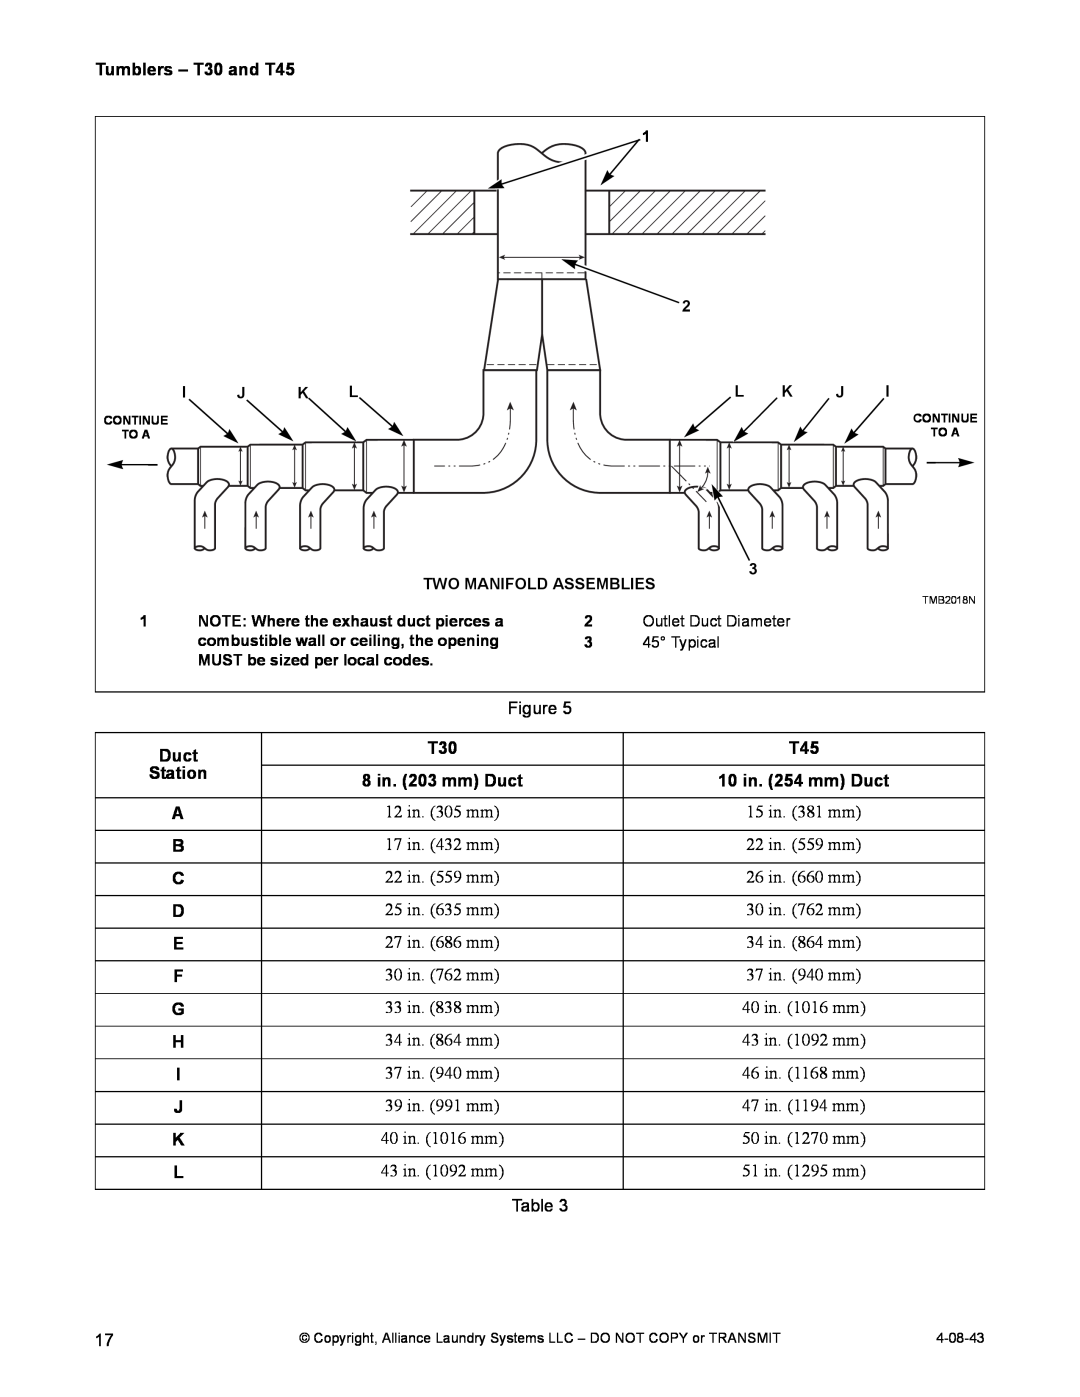 IPSO T45, T30 installation manual Outlet Duct Diameter, Typical, TMB2018N 